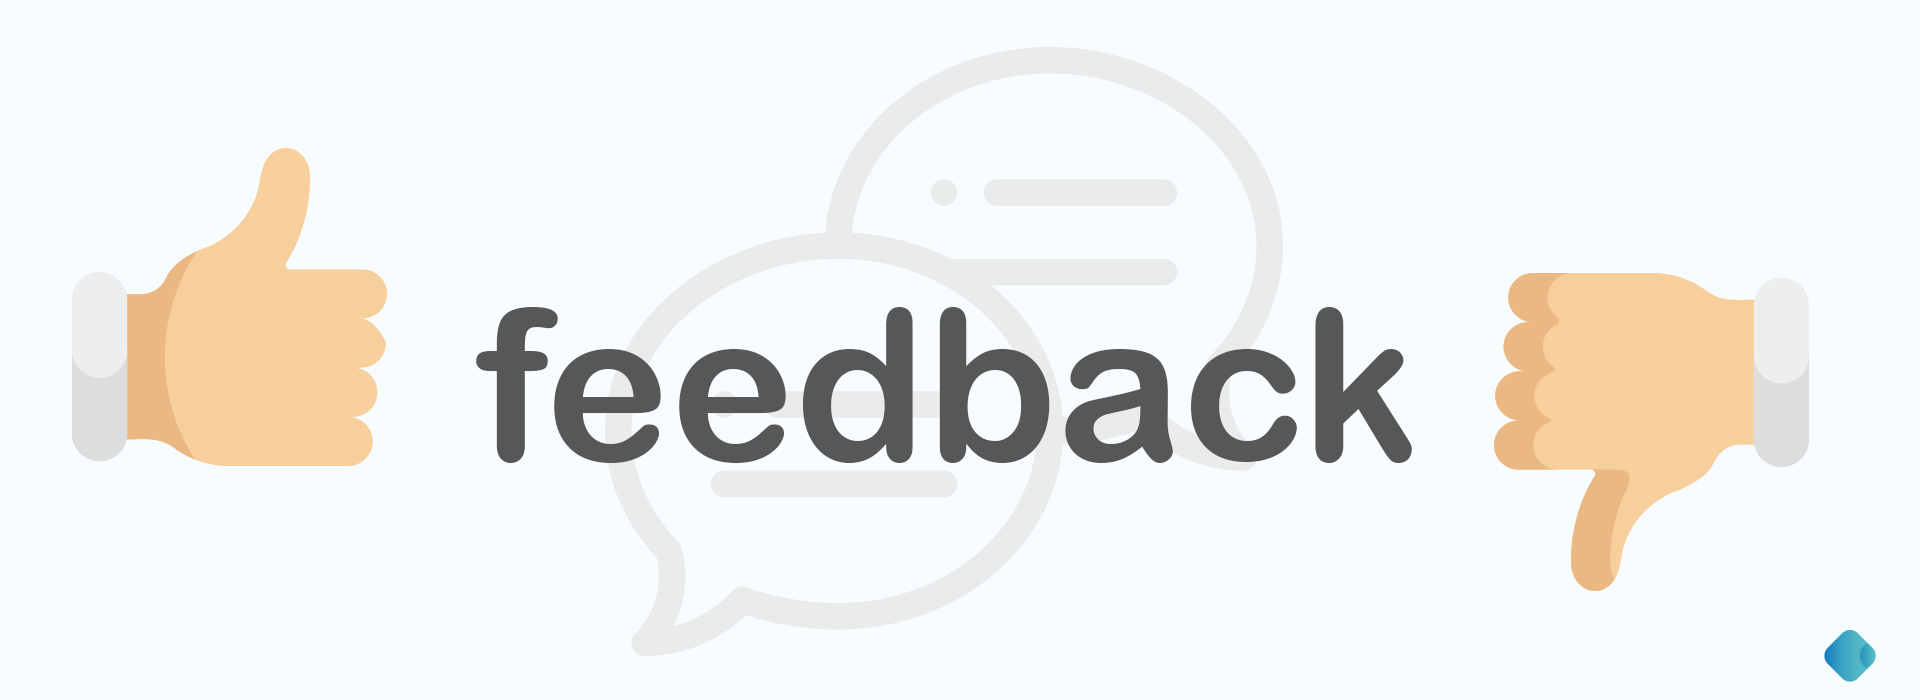 The importance of feedback in your work